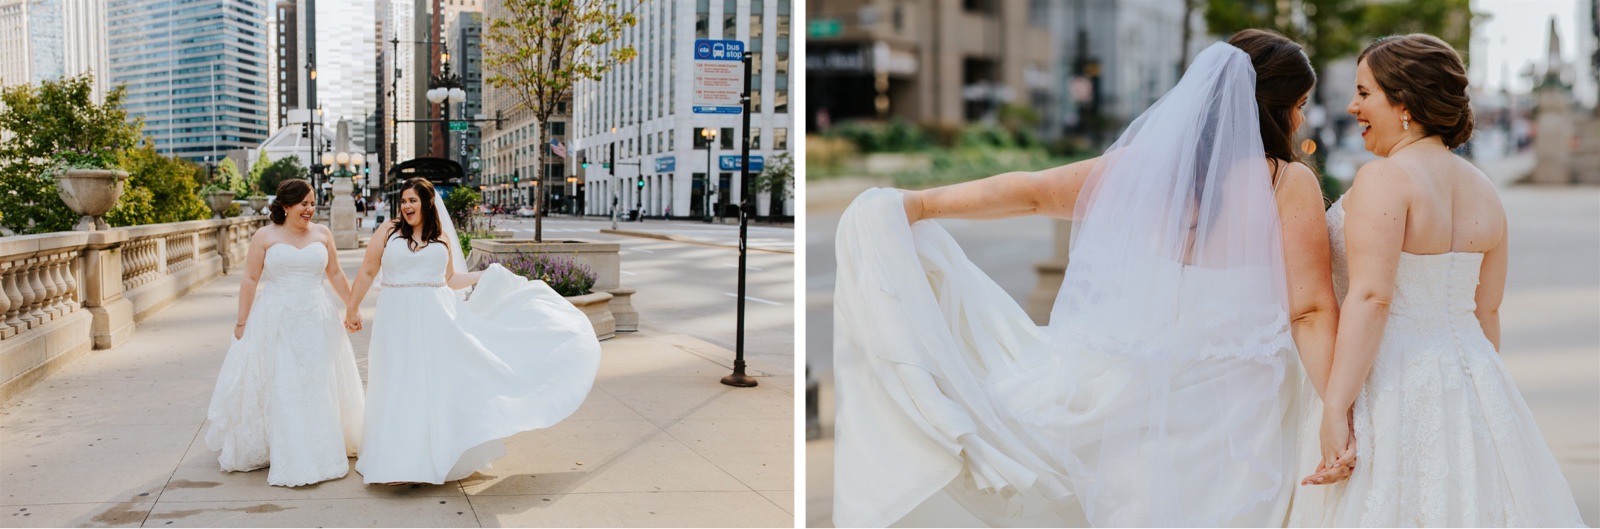 Bridal portraits in Downtown Chicago